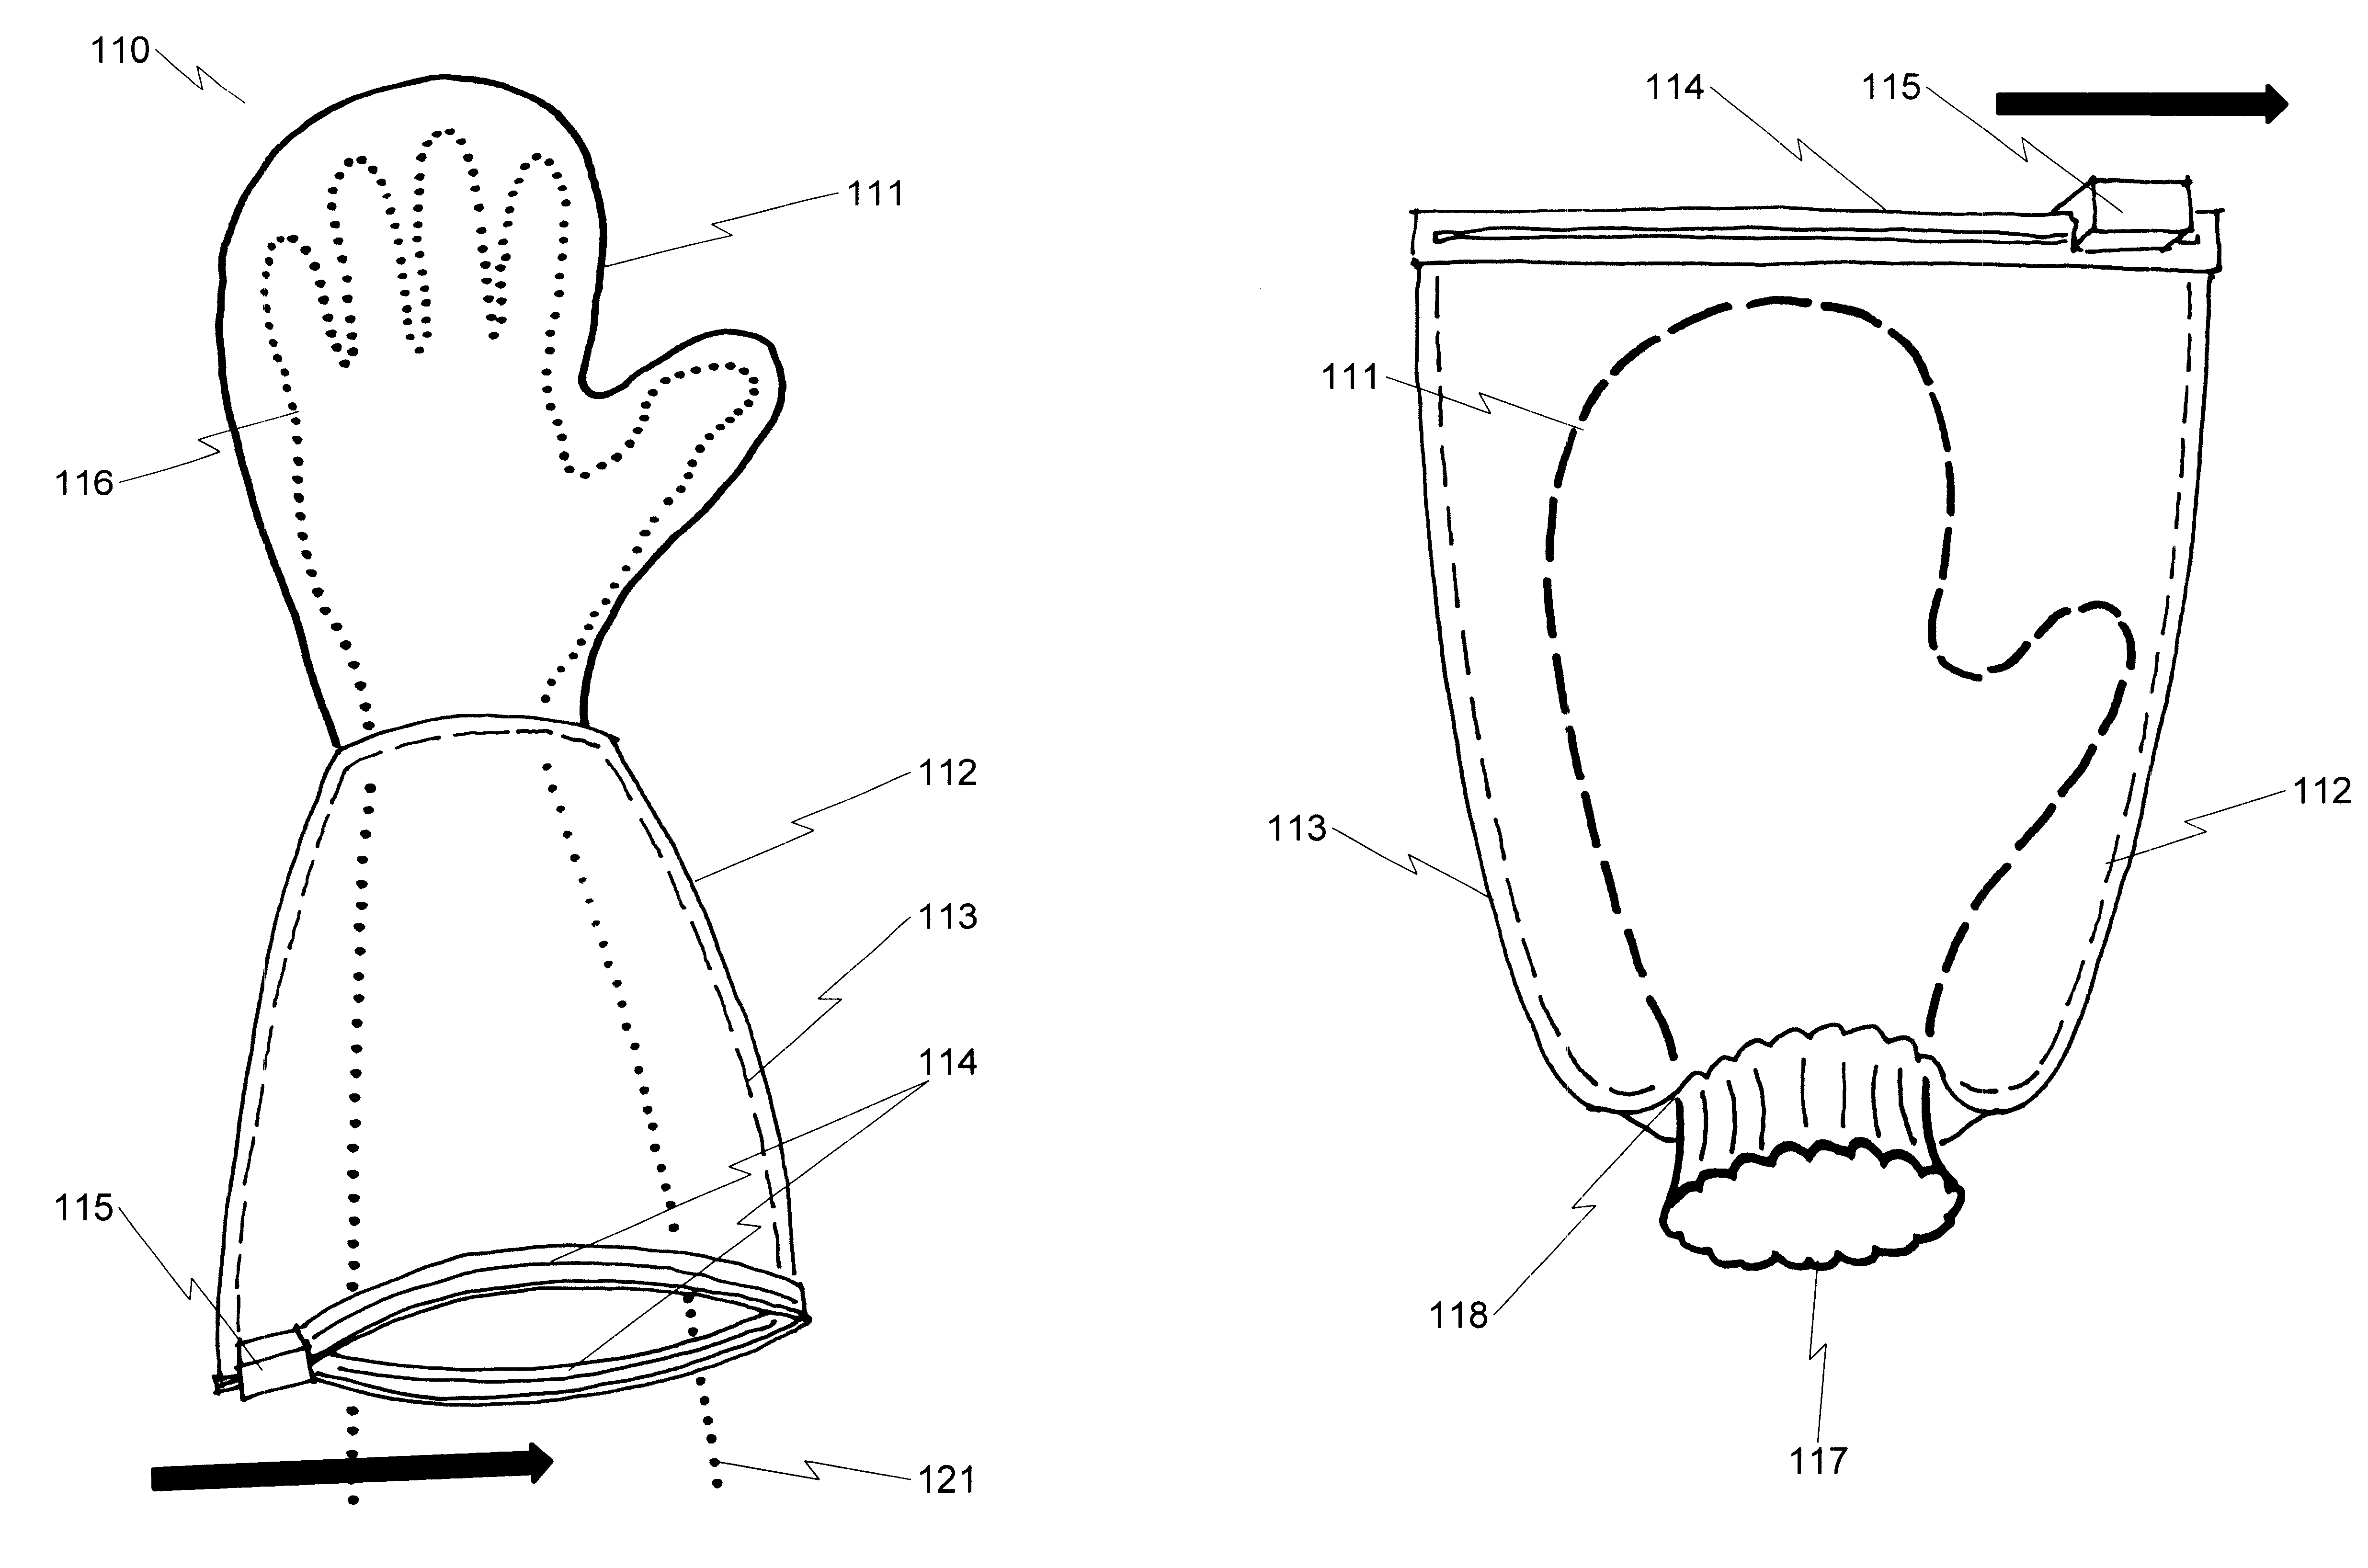 Safety applicator glove system and method